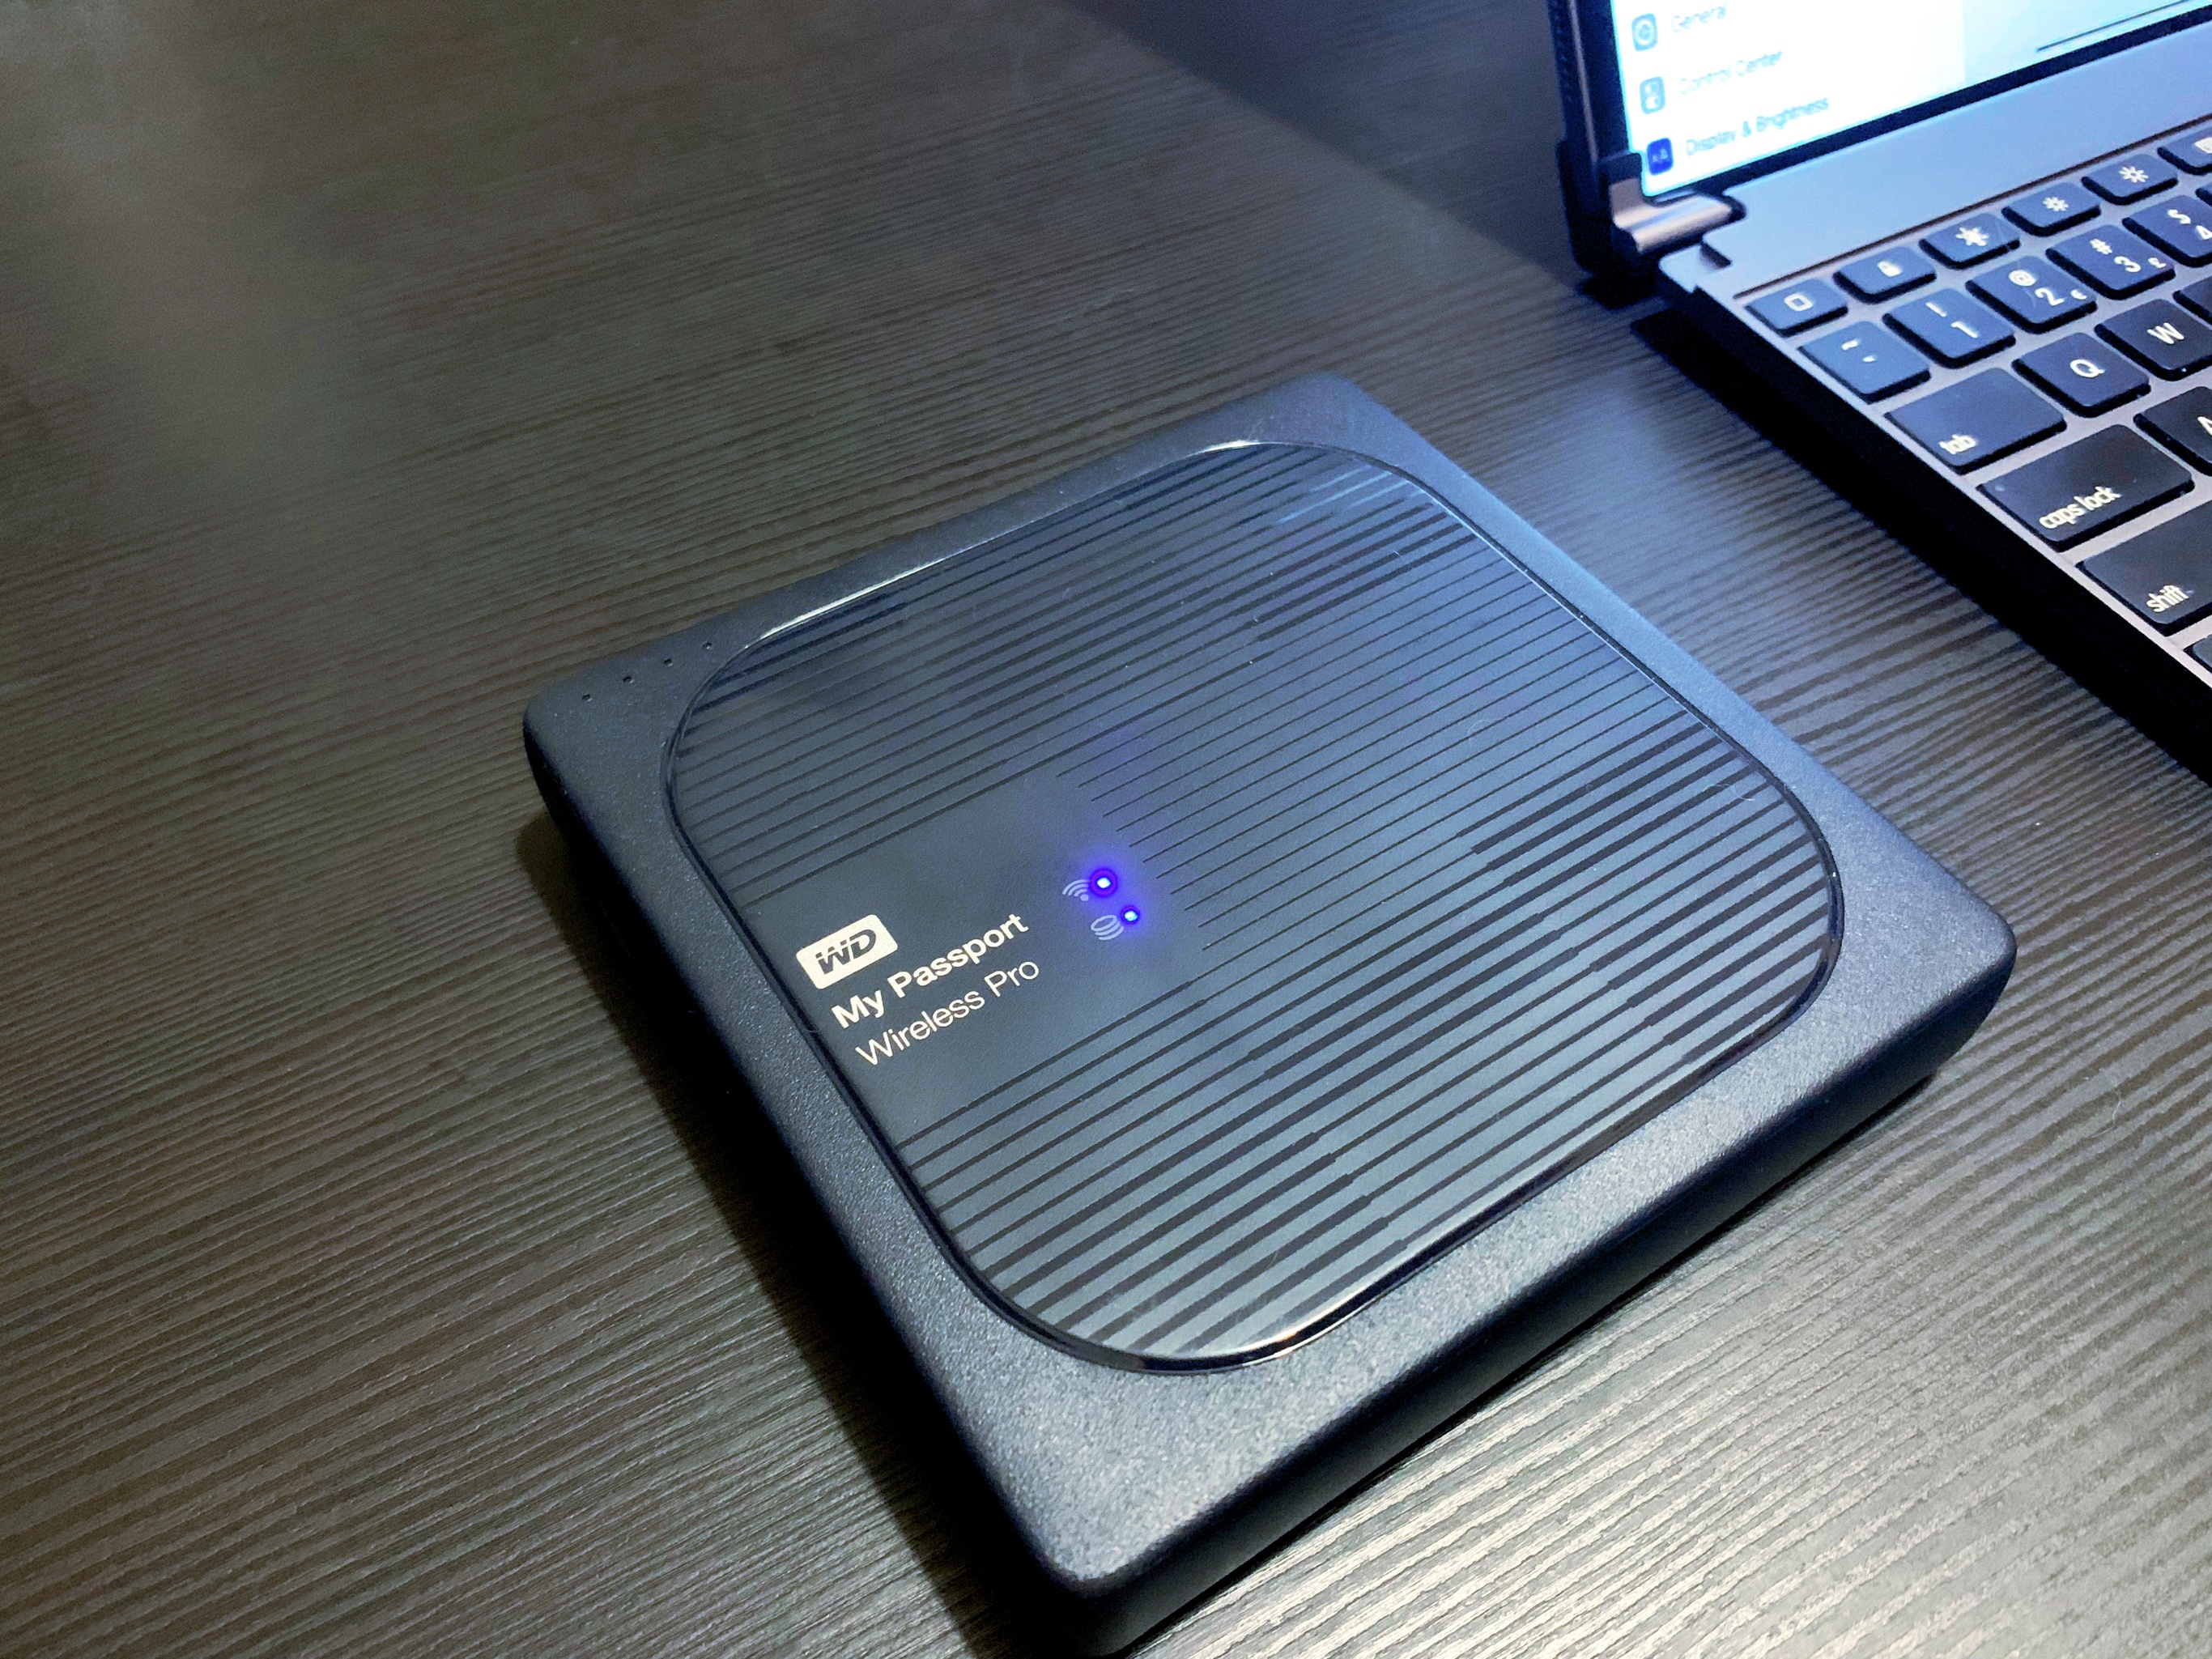 The WiFi drive I use to transfer files from an SD card to the iPad Pro.